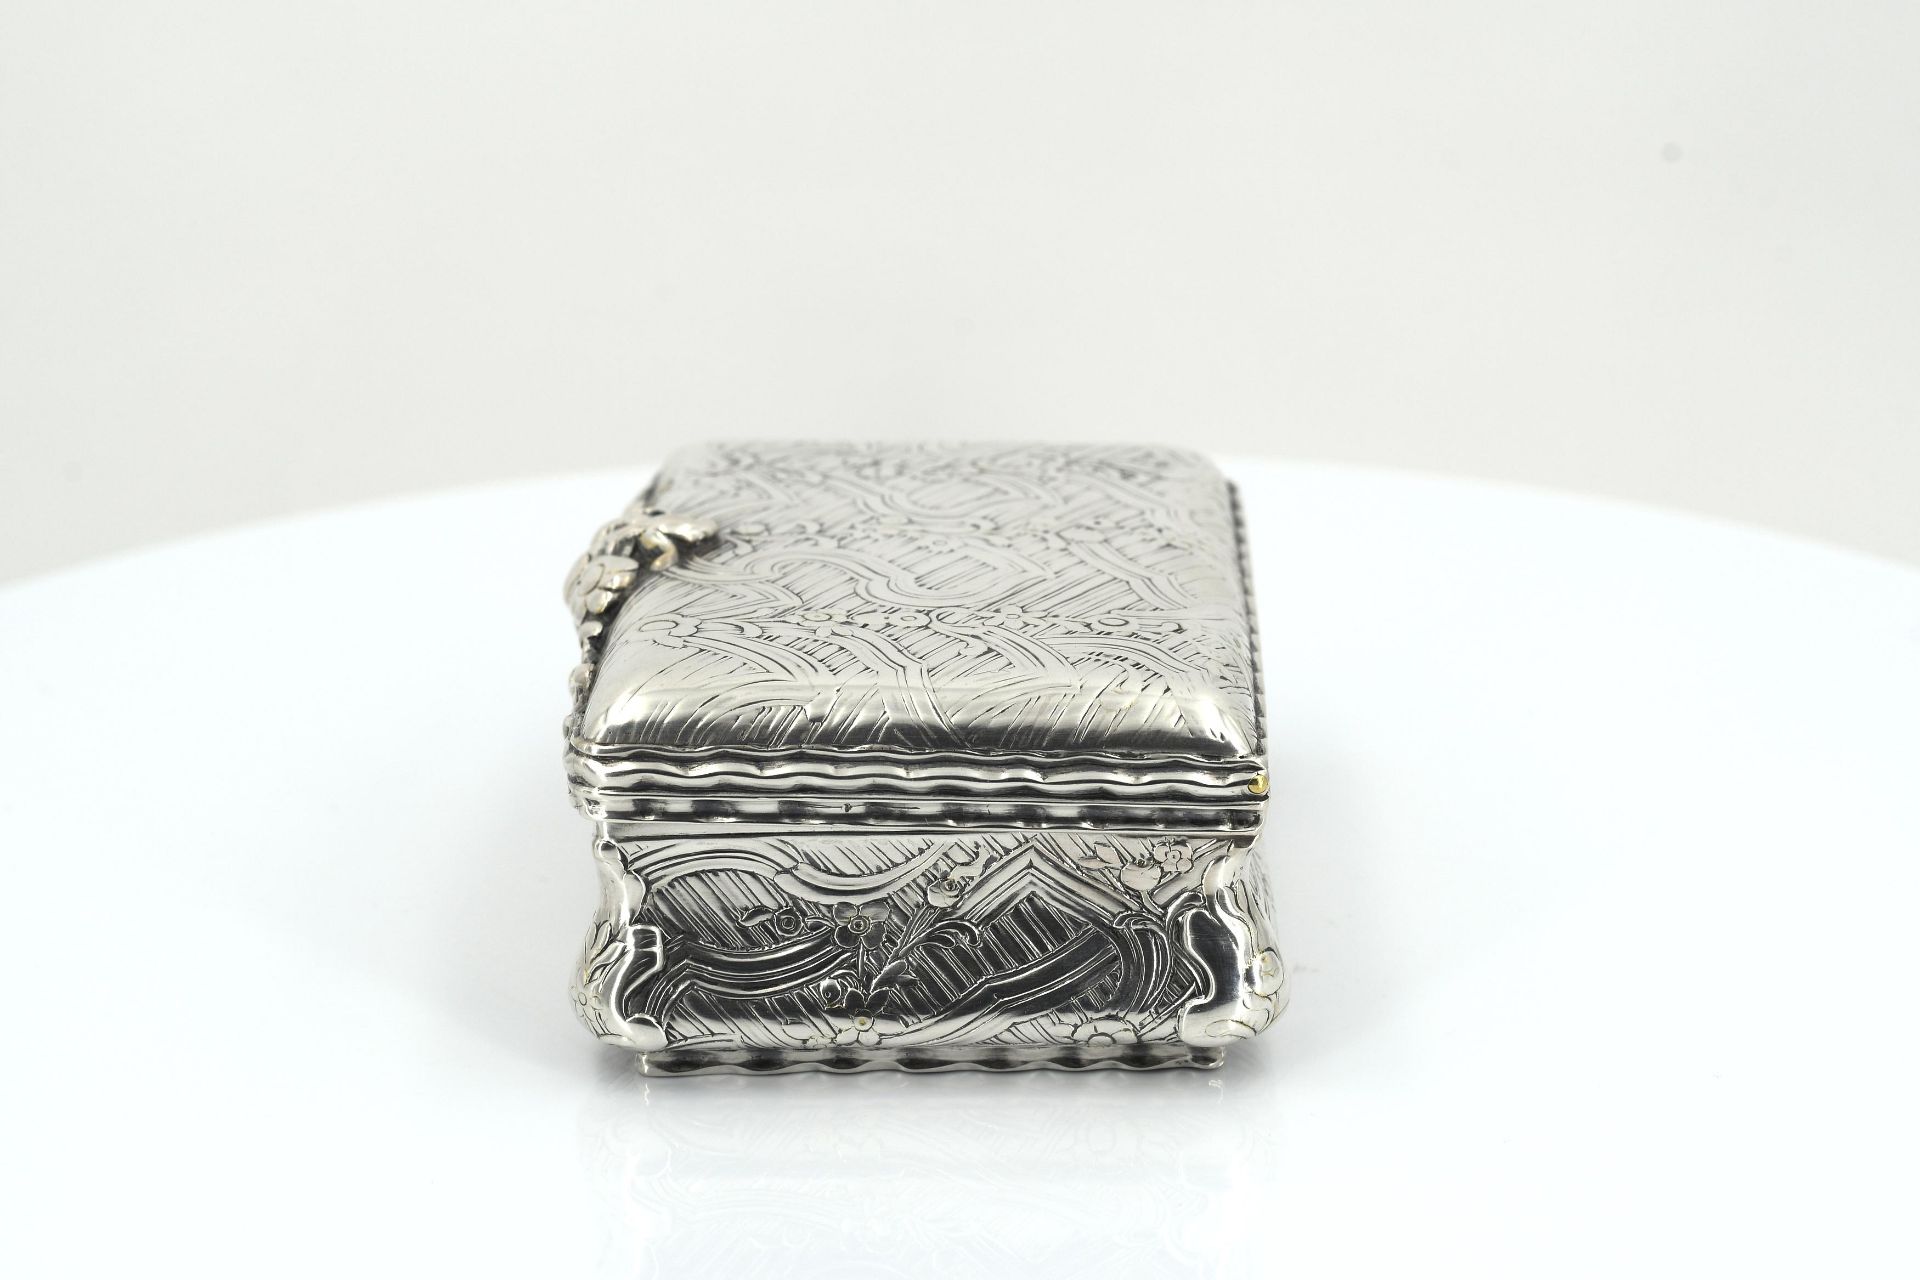 Silver snuffbox with flower tendrils - Image 3 of 9